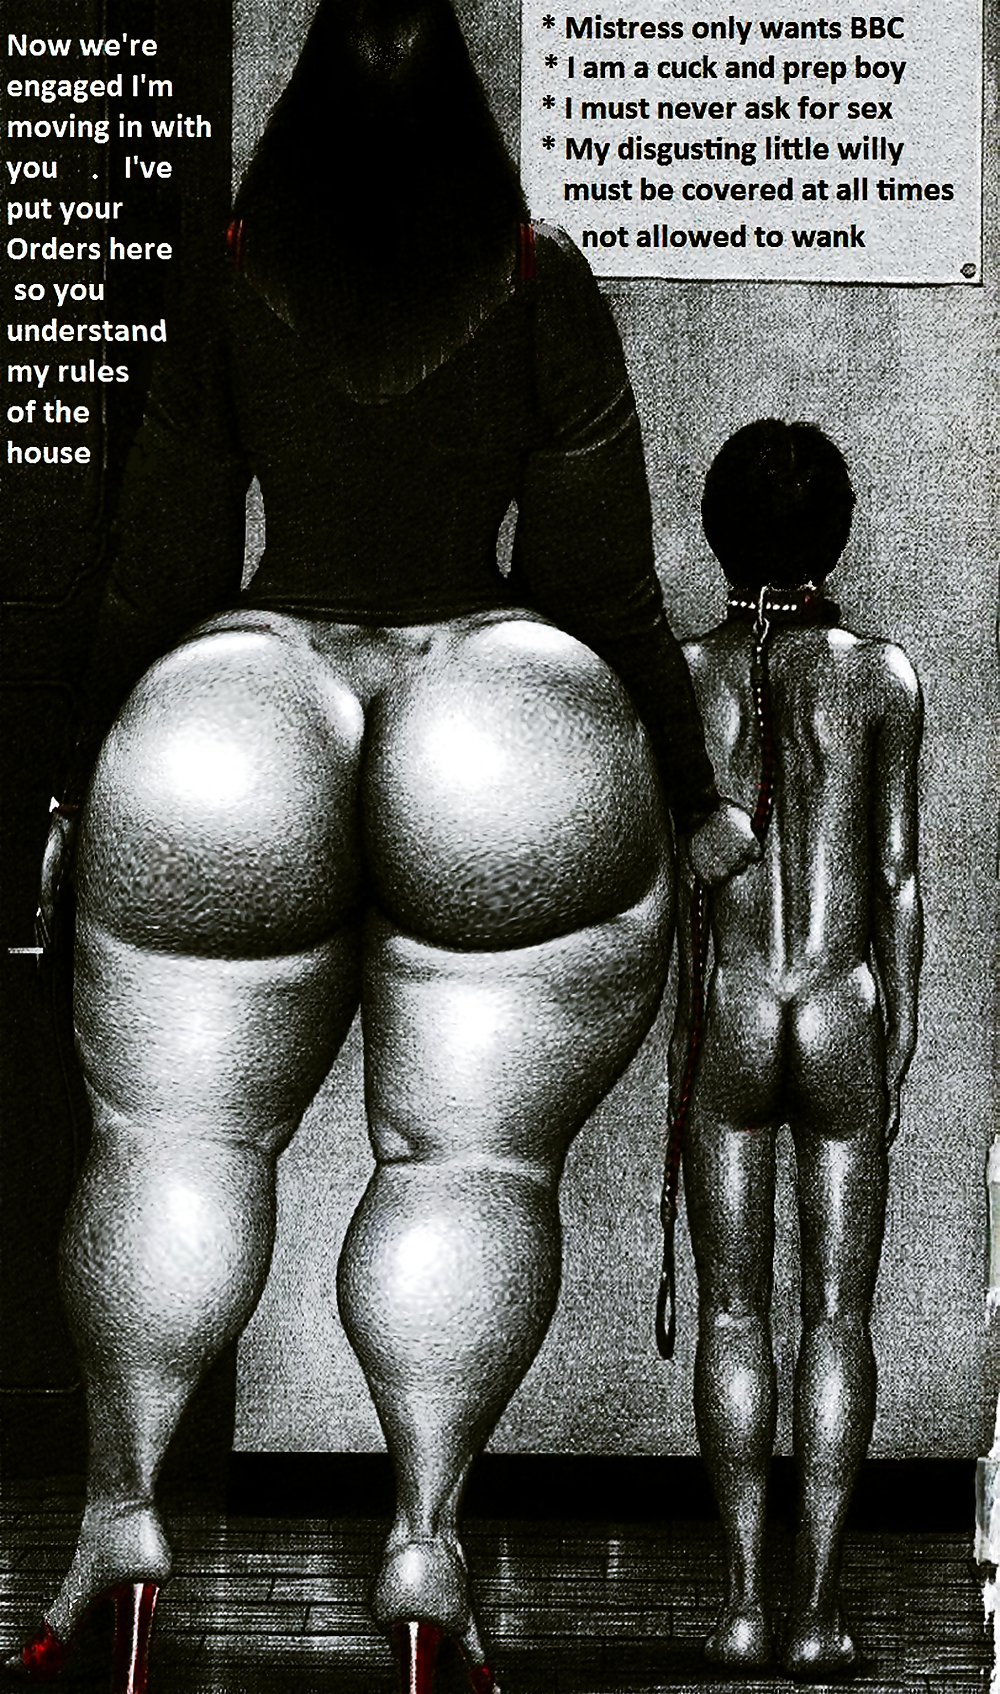 BBW asses in Photoshop. #7833457